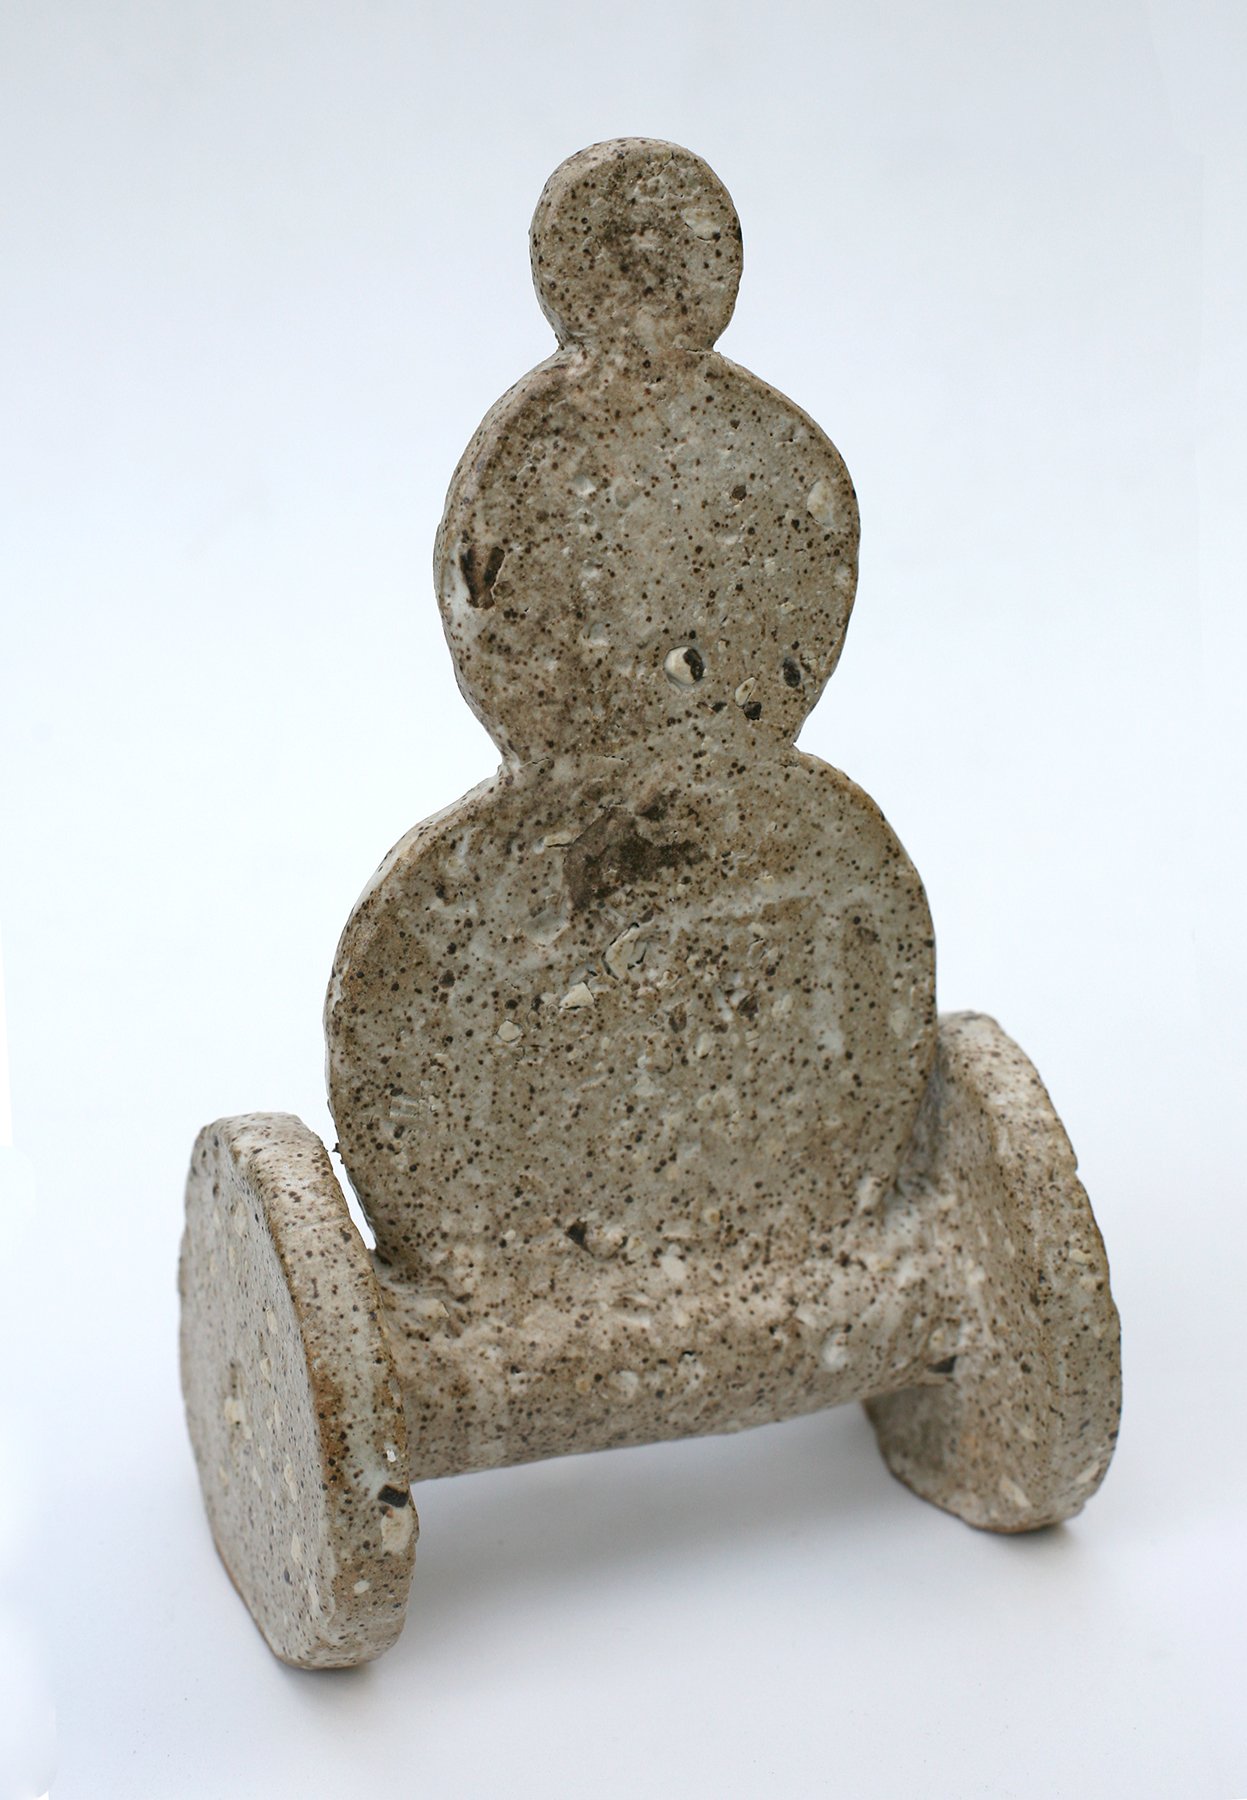 Snowman on a Roll (private collection)